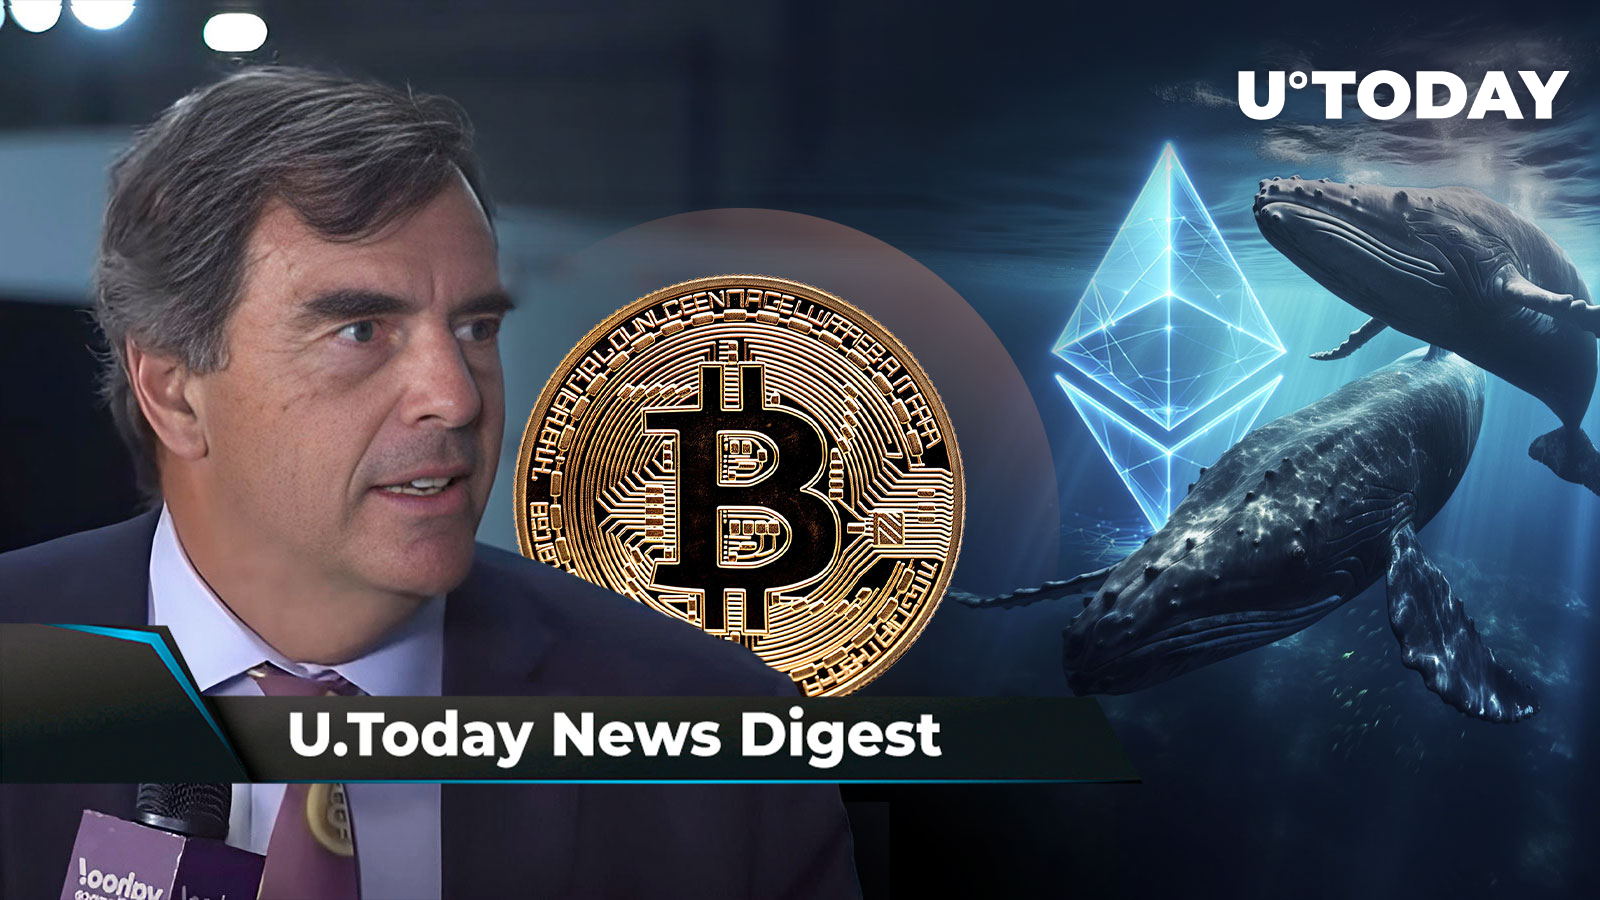 Tim Draper Teases 10-Year Return on His Epic BTC Bet, Surprising ETH Long-Term Indicator Appears, 16 Million XRP Bought by Single Whale on Korean Exchange: Crypto News Digest by U.Today